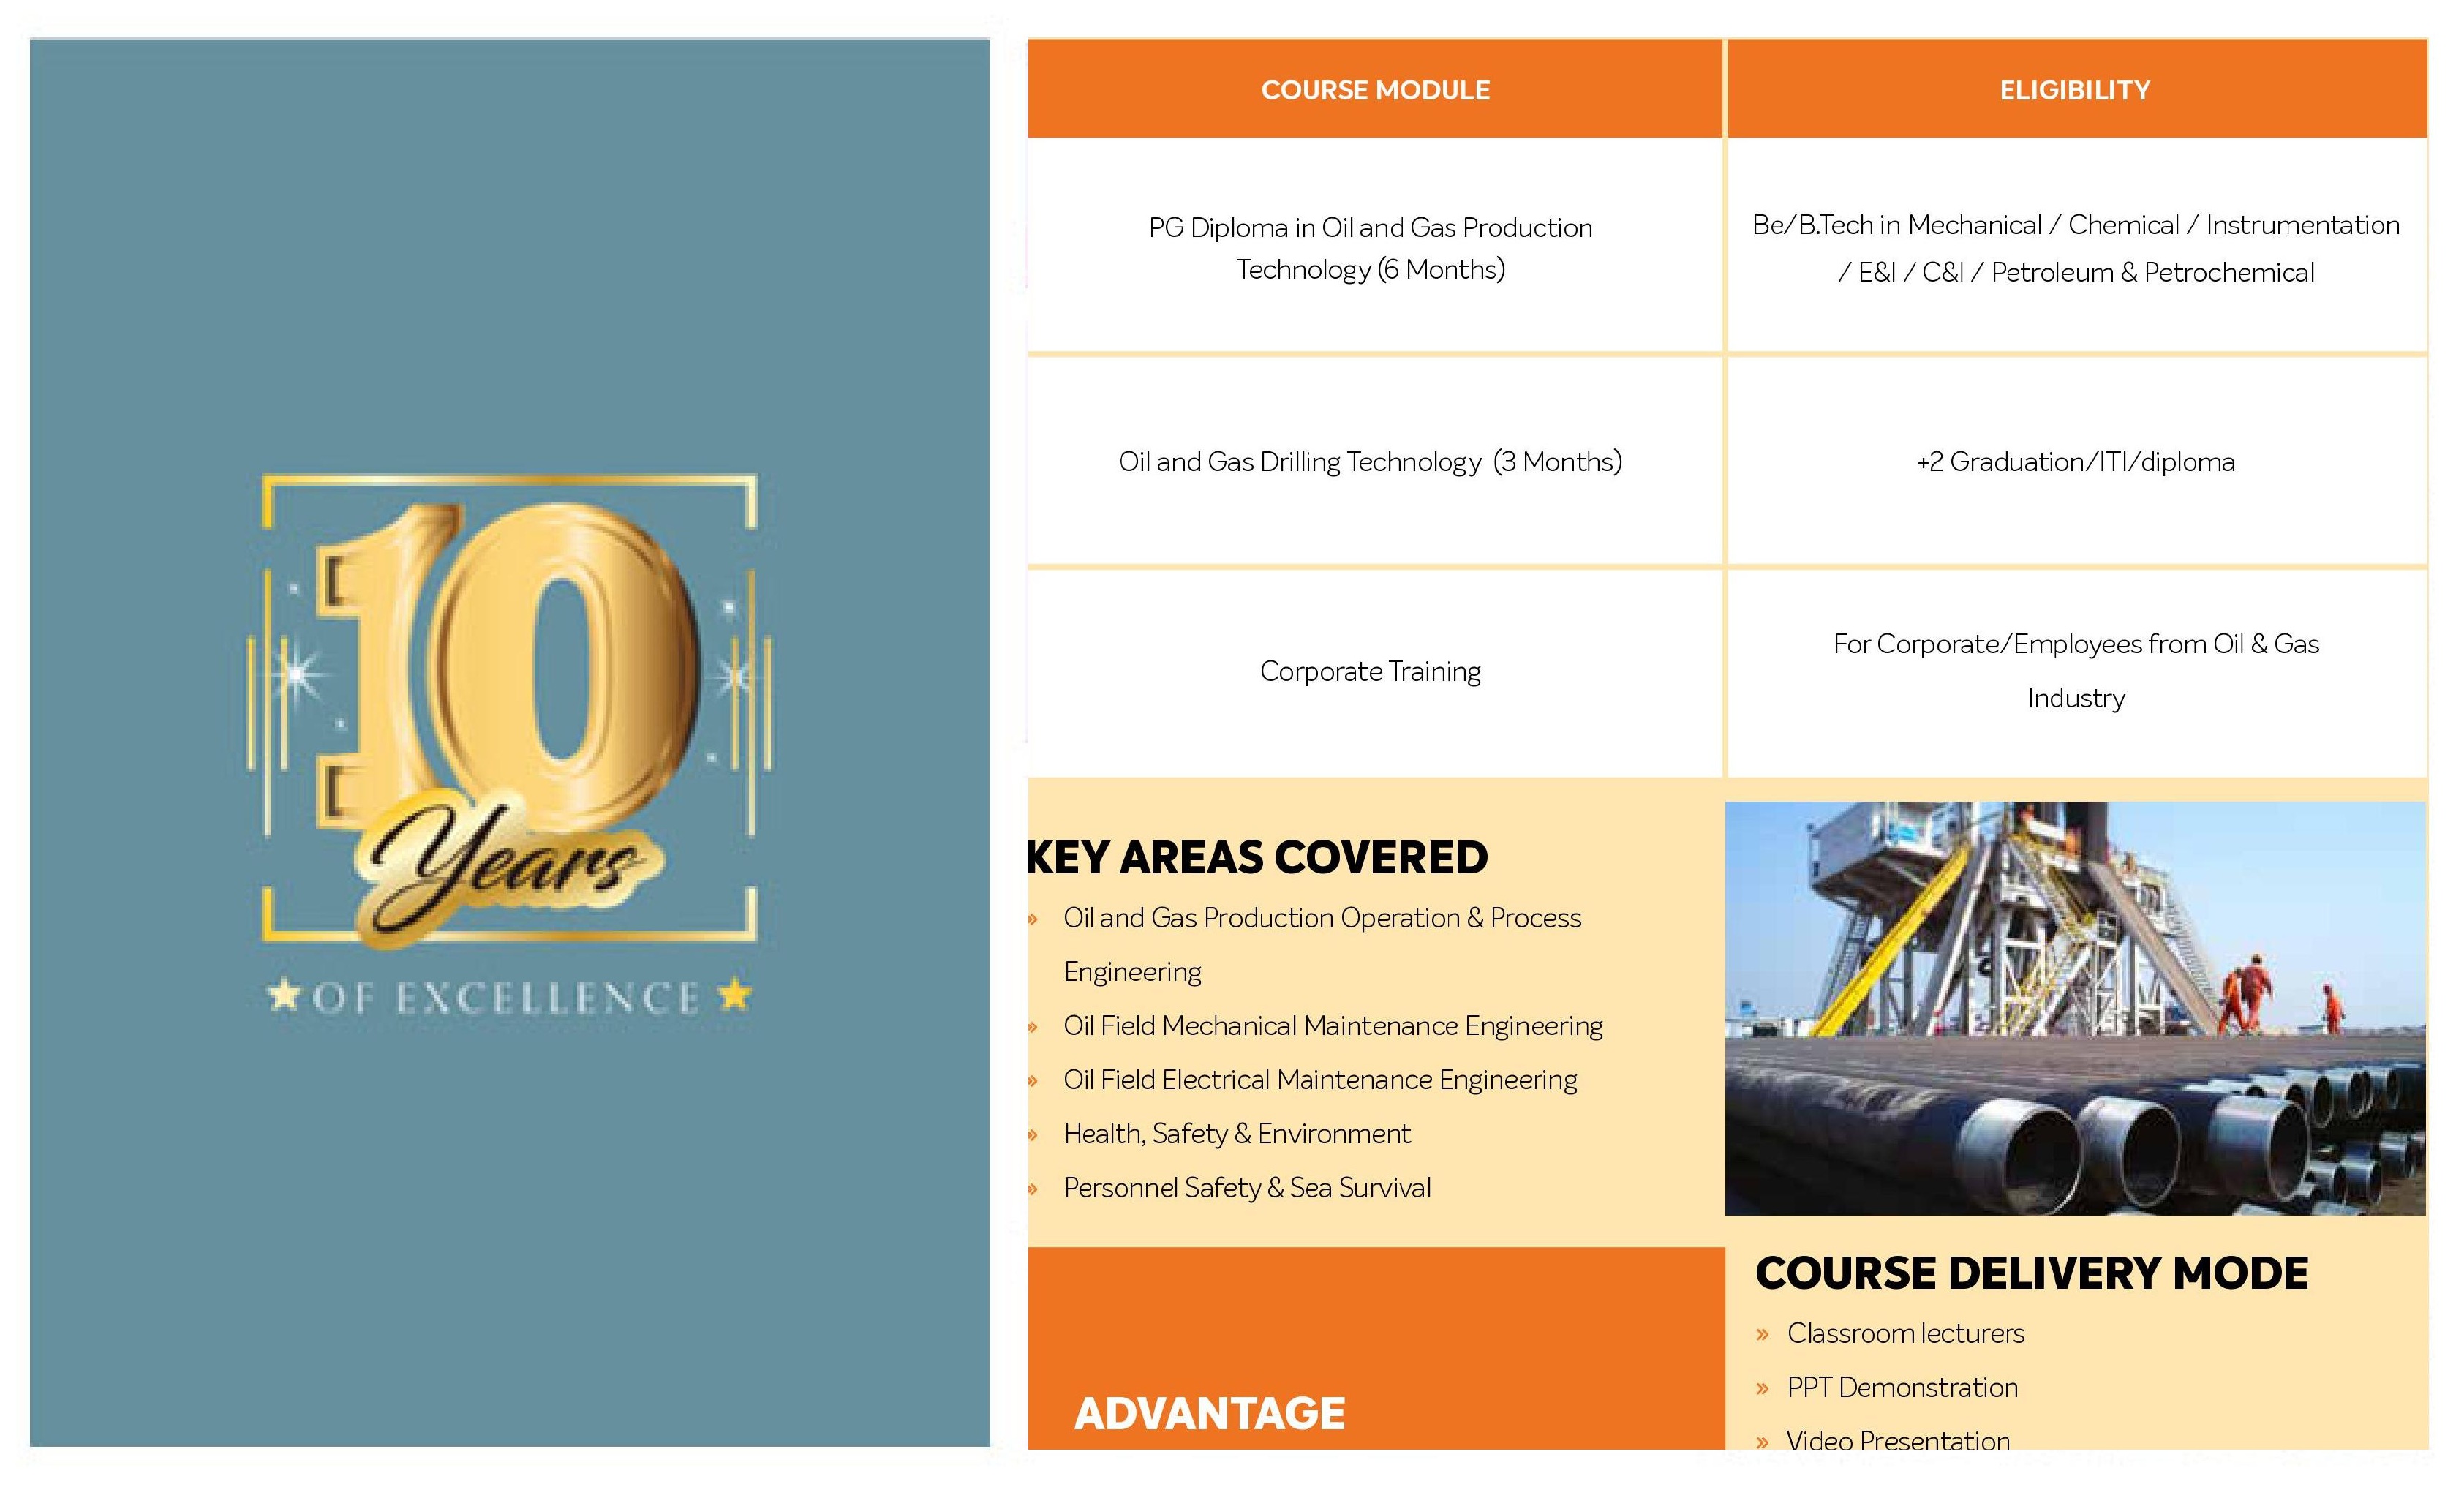 Oil & Gas Drilling/Rig Technology course syllabus